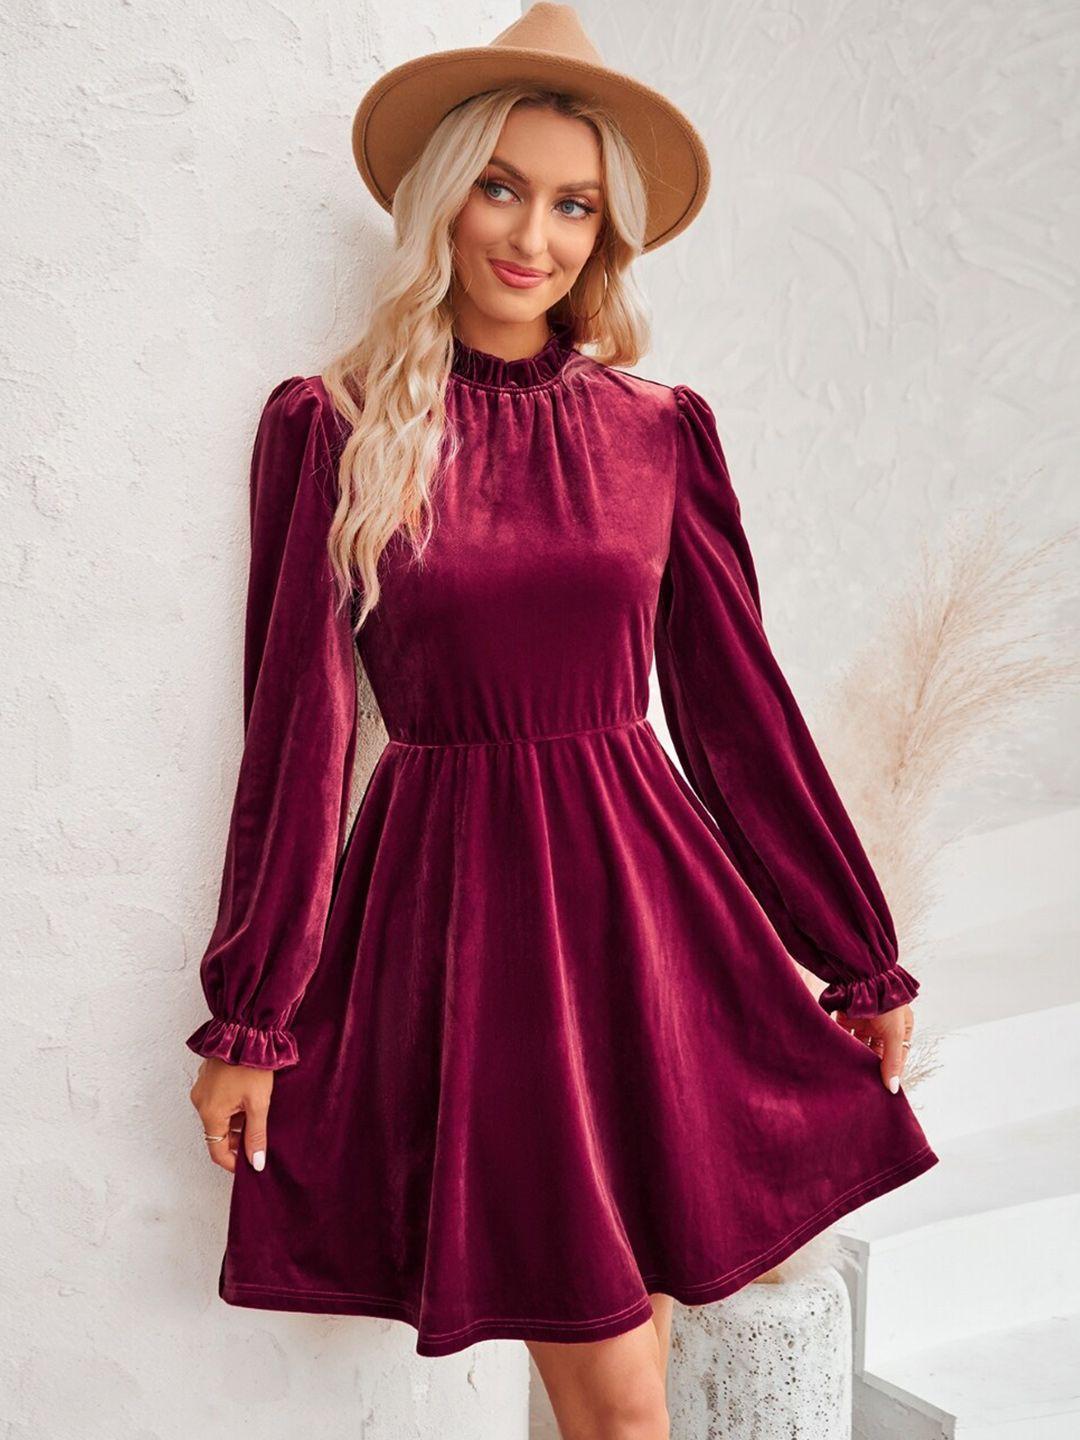 stylecast purple high neck puff sleeves fit & flare dress